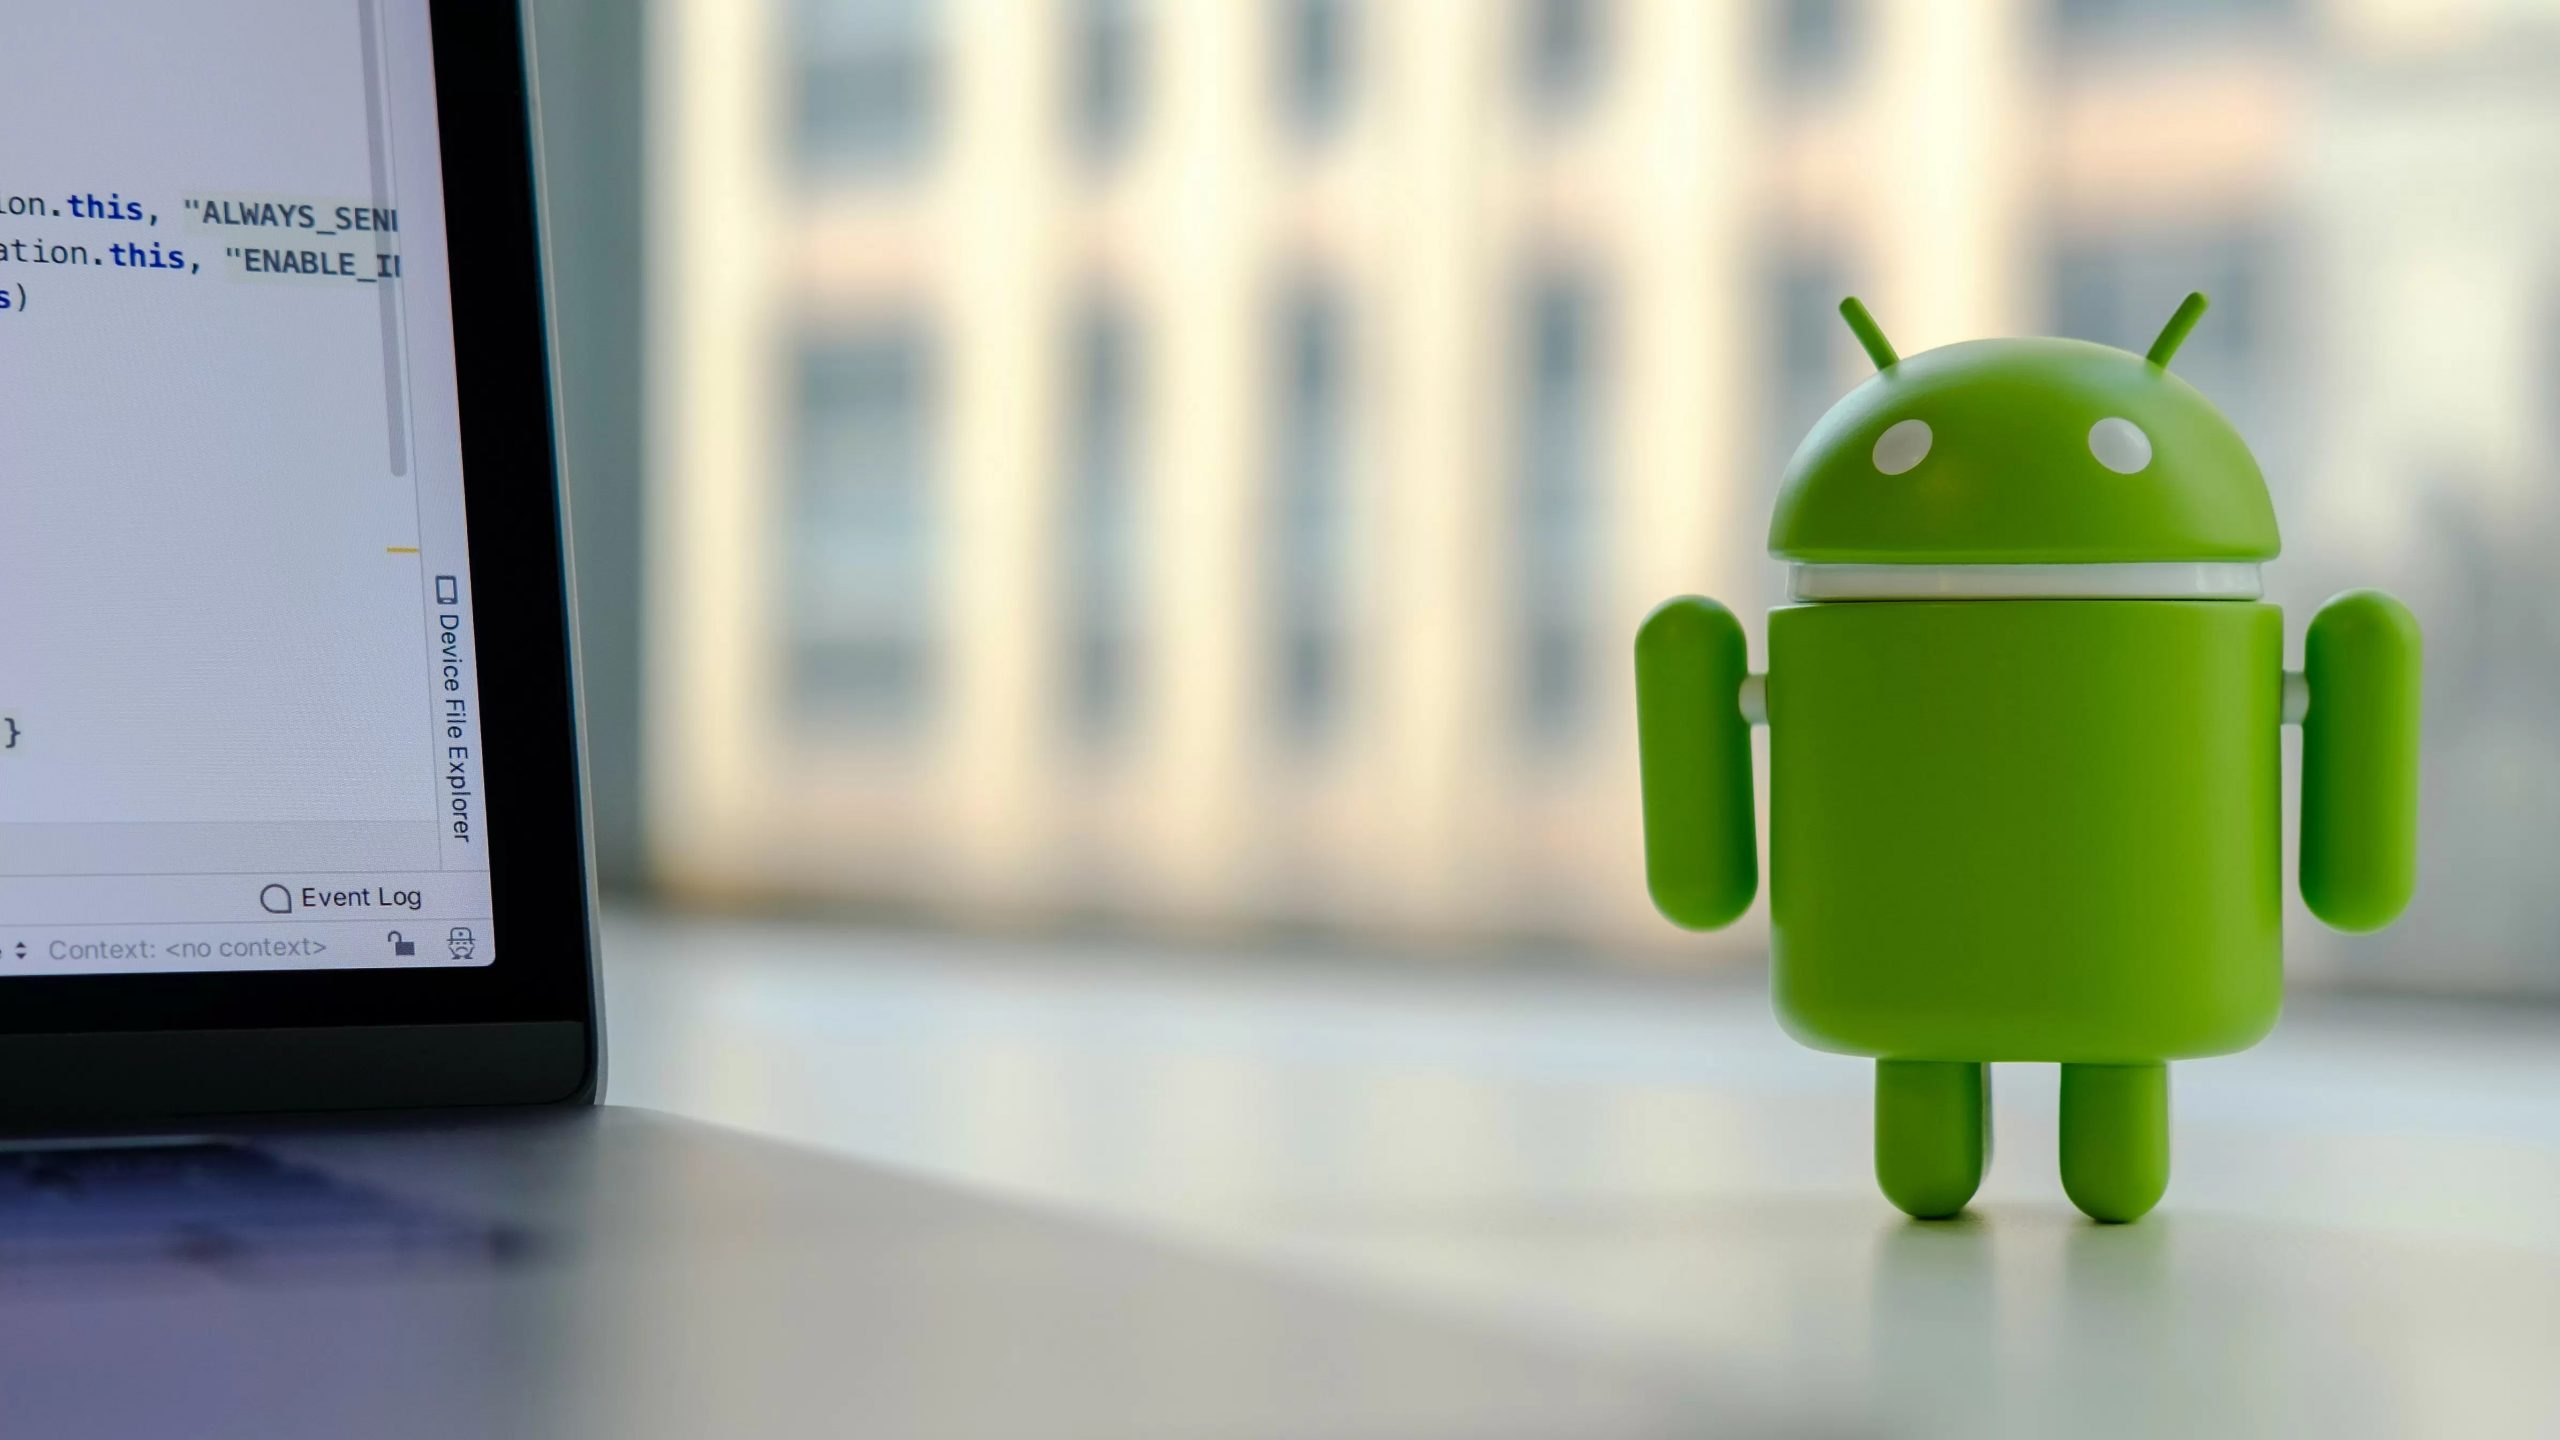 Users of these Android devices will be denied Google services as of September 27